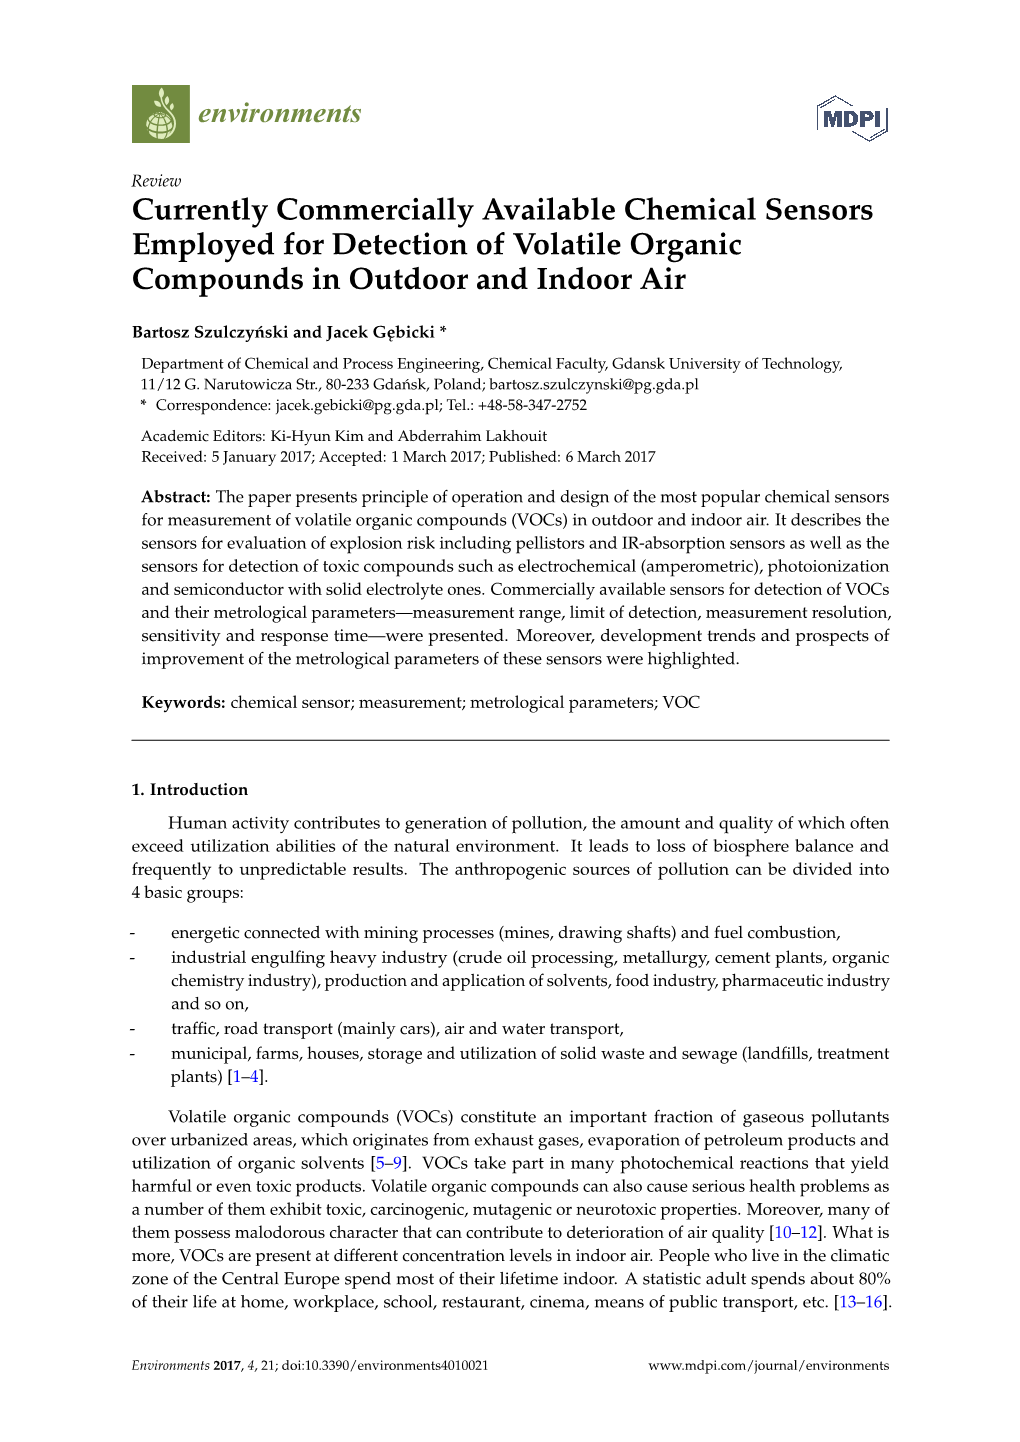 Currently Commercially Available Chemical Sensors Employed for Detection of Volatile Organic Compounds in Outdoor and Indoor Air